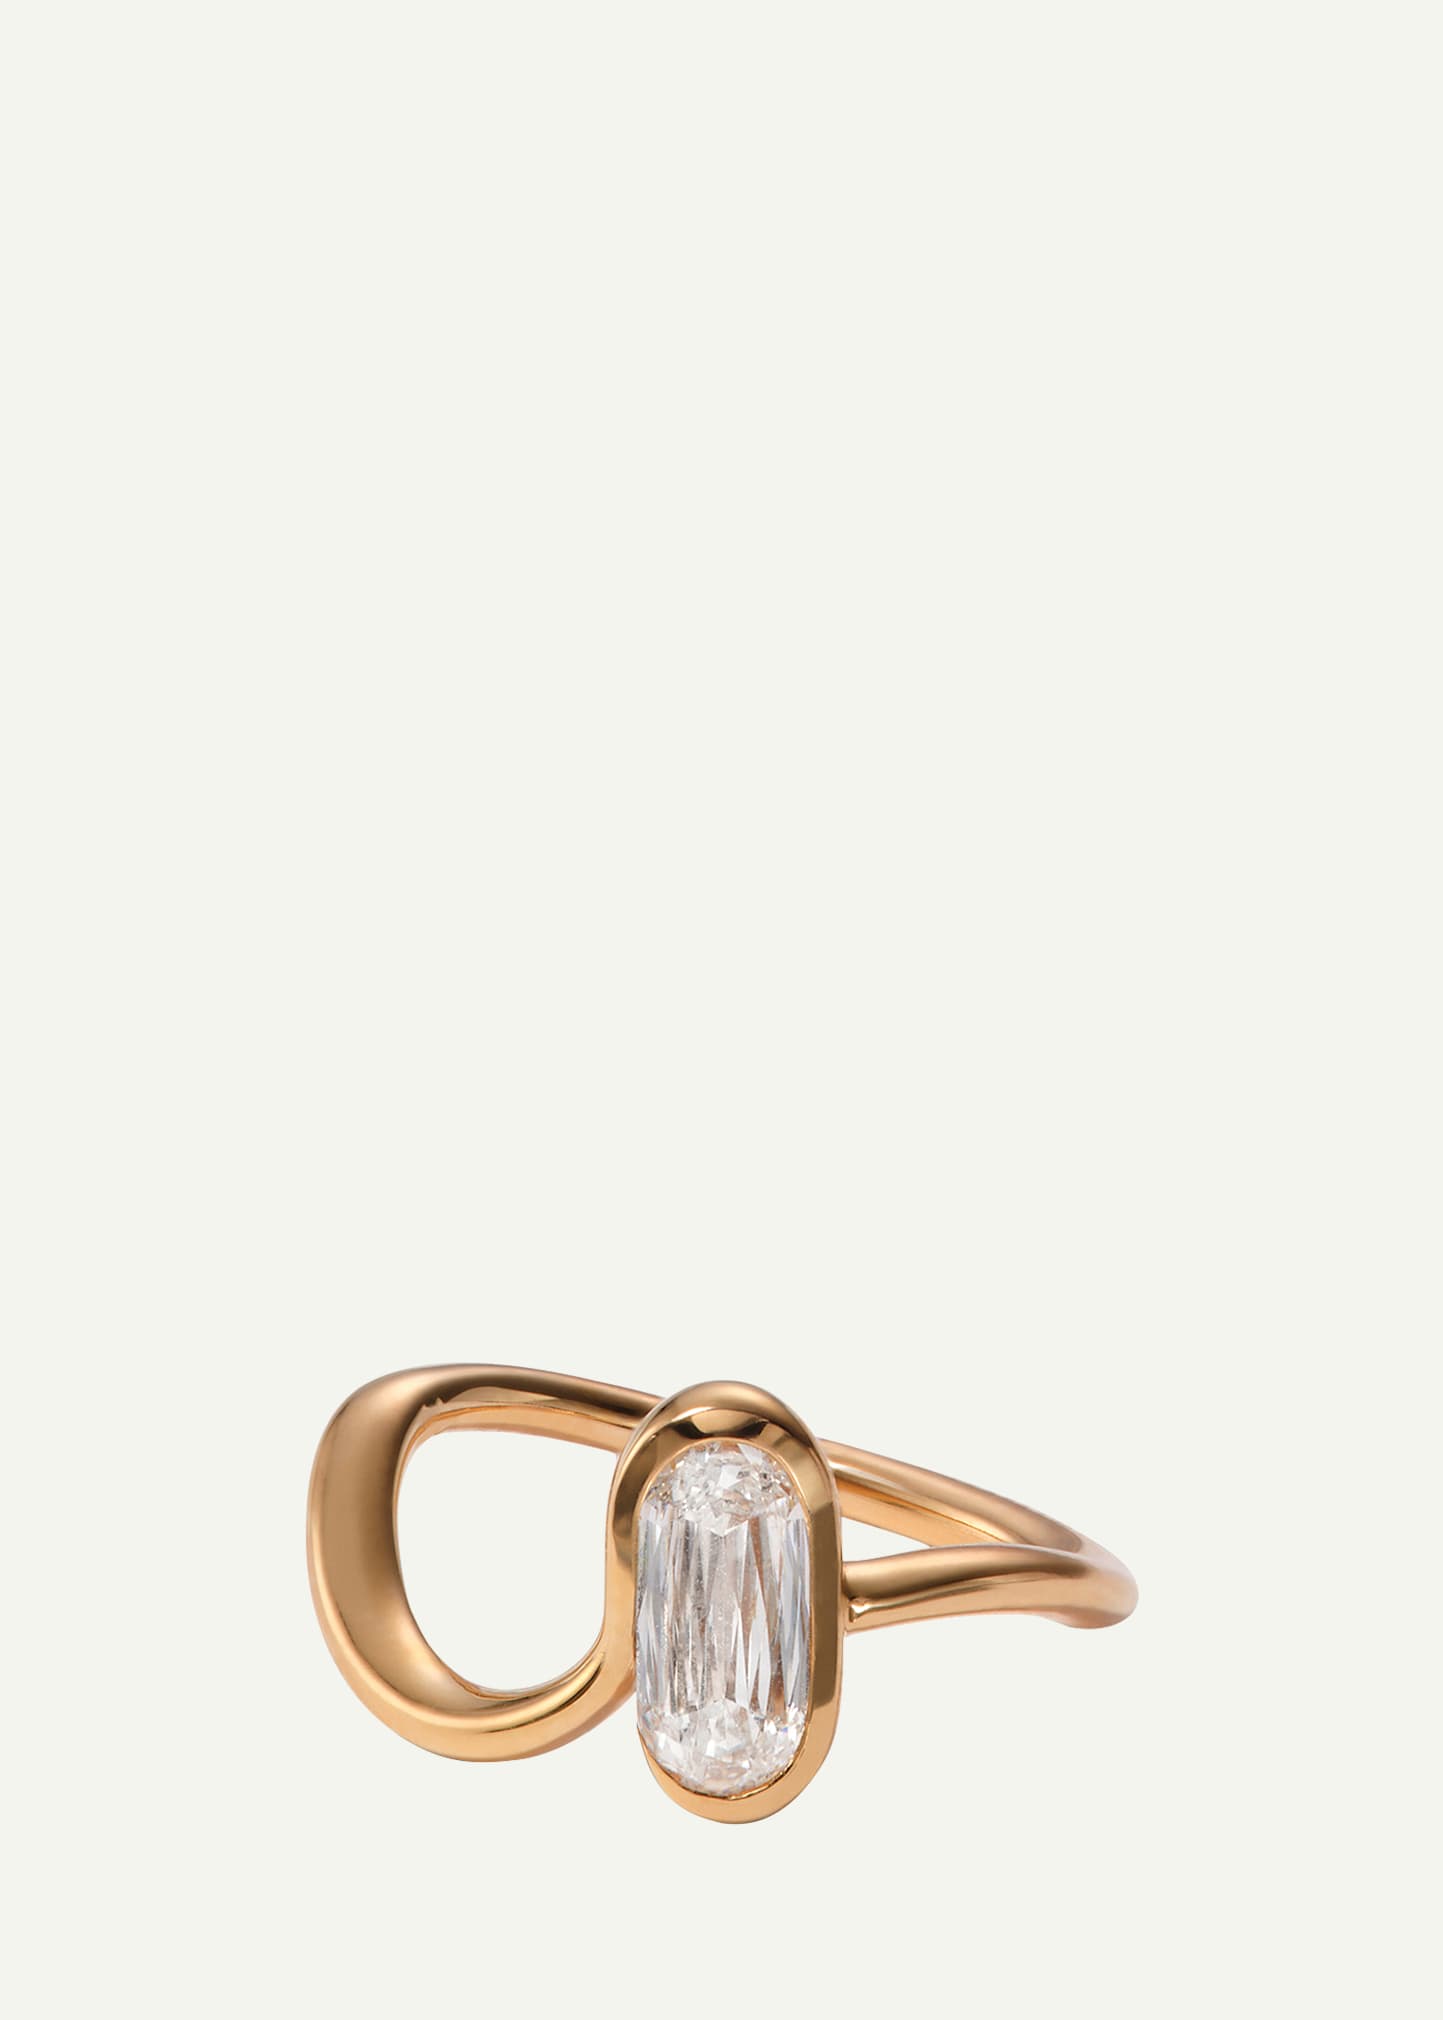 20K Rose Gold Twist and Tie Oval Solitaire Ring with White Diamond